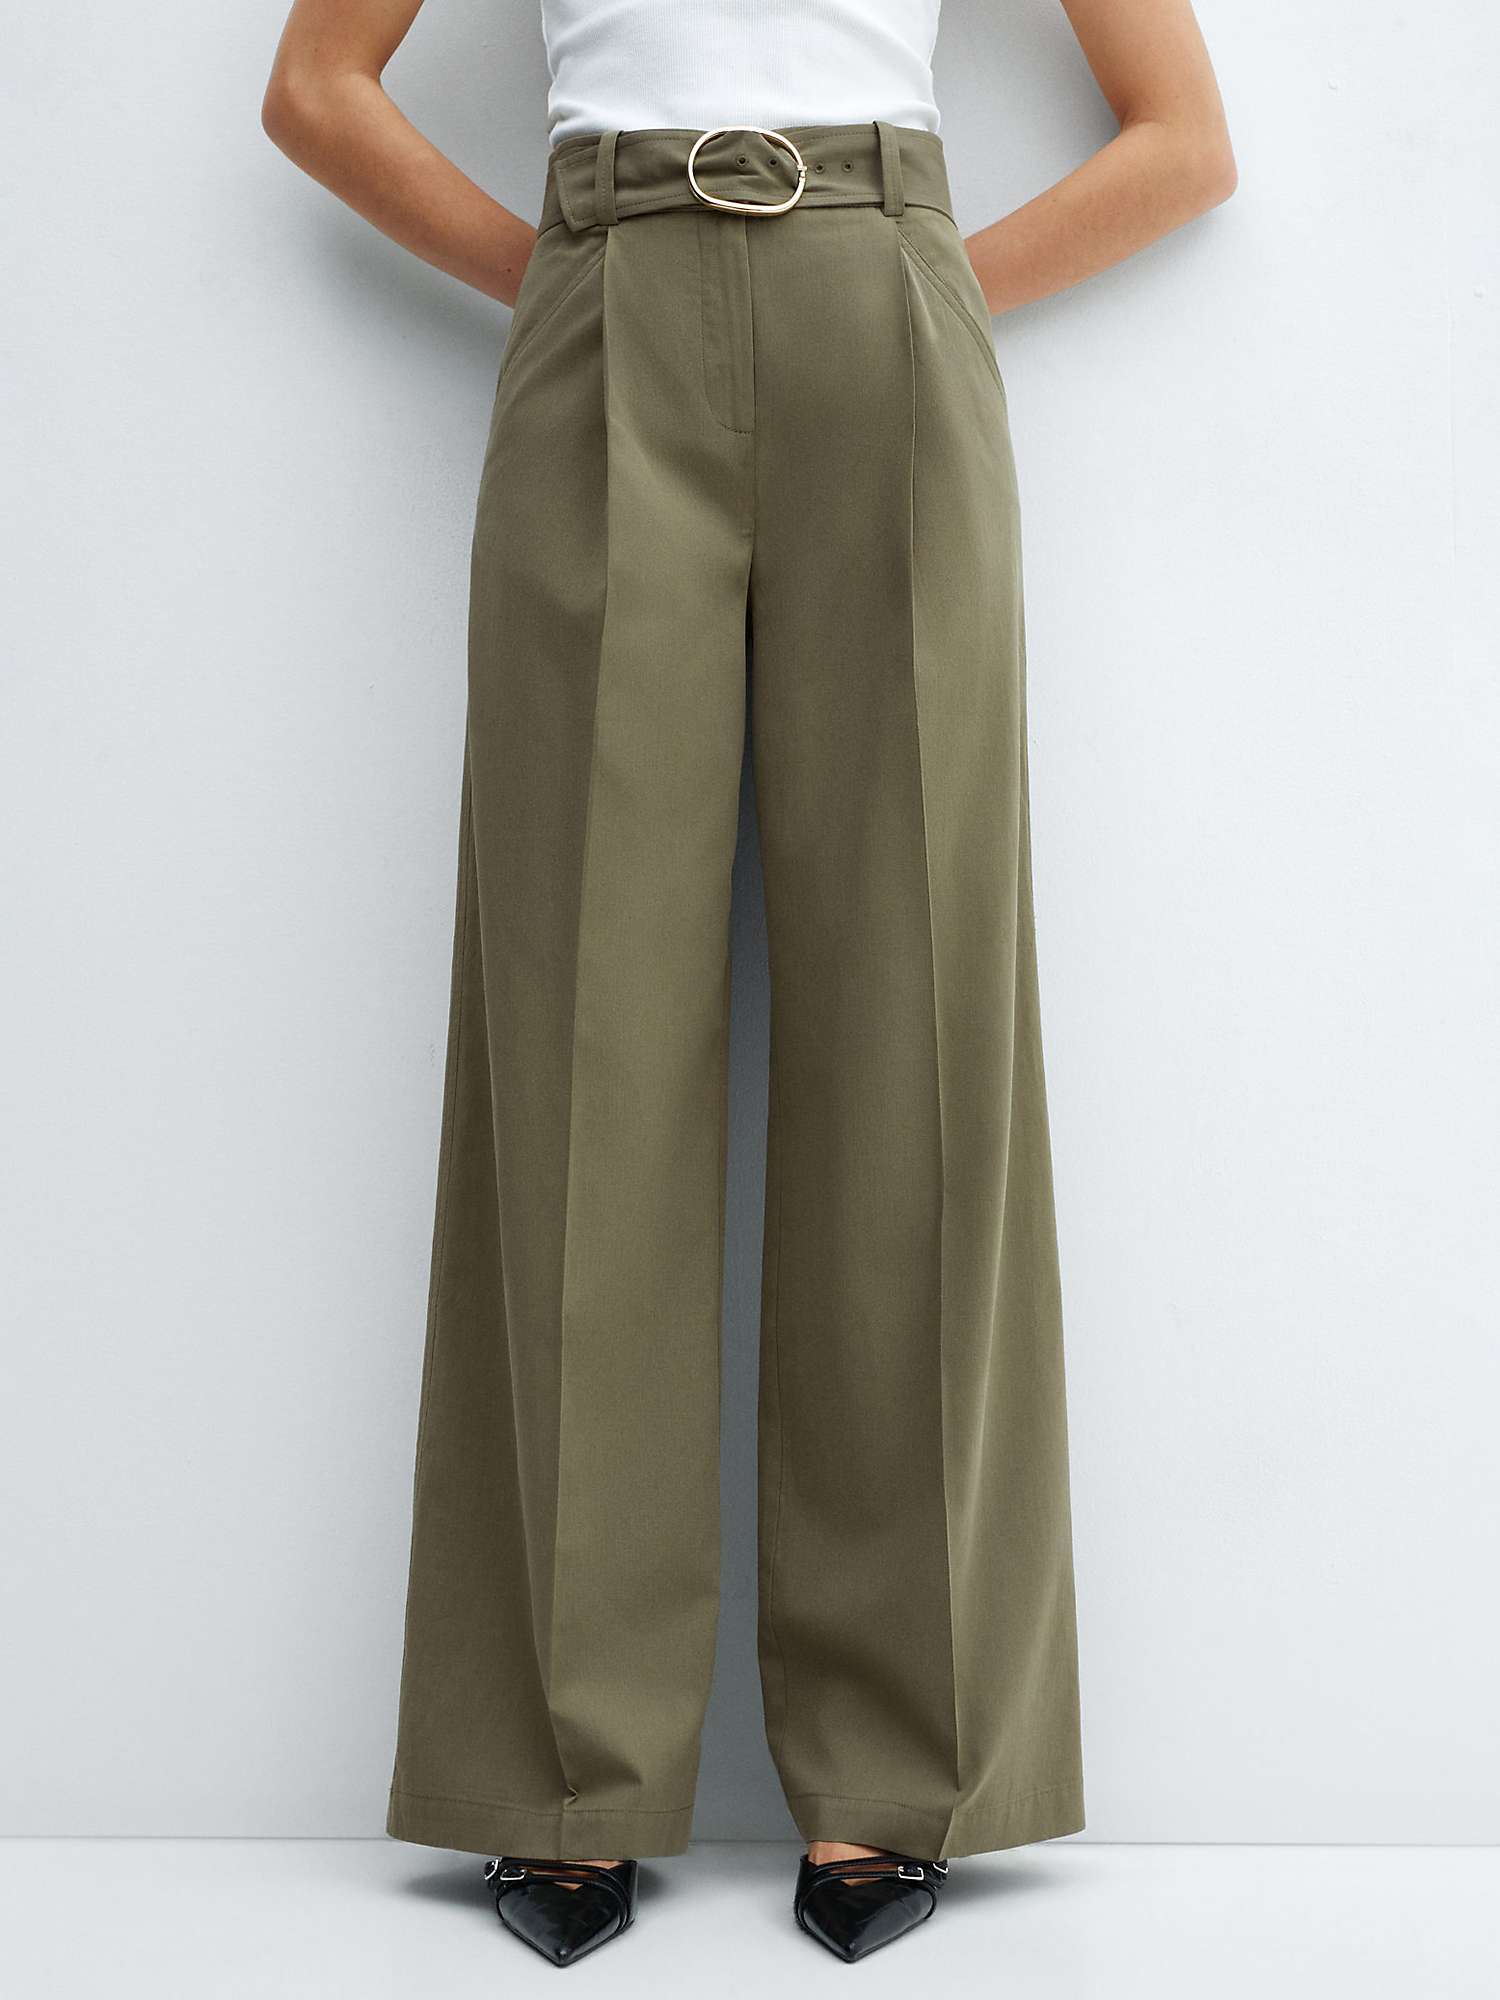 Buy Mango Angie Belted Wide Leg Trousers, Khaki Online at johnlewis.com